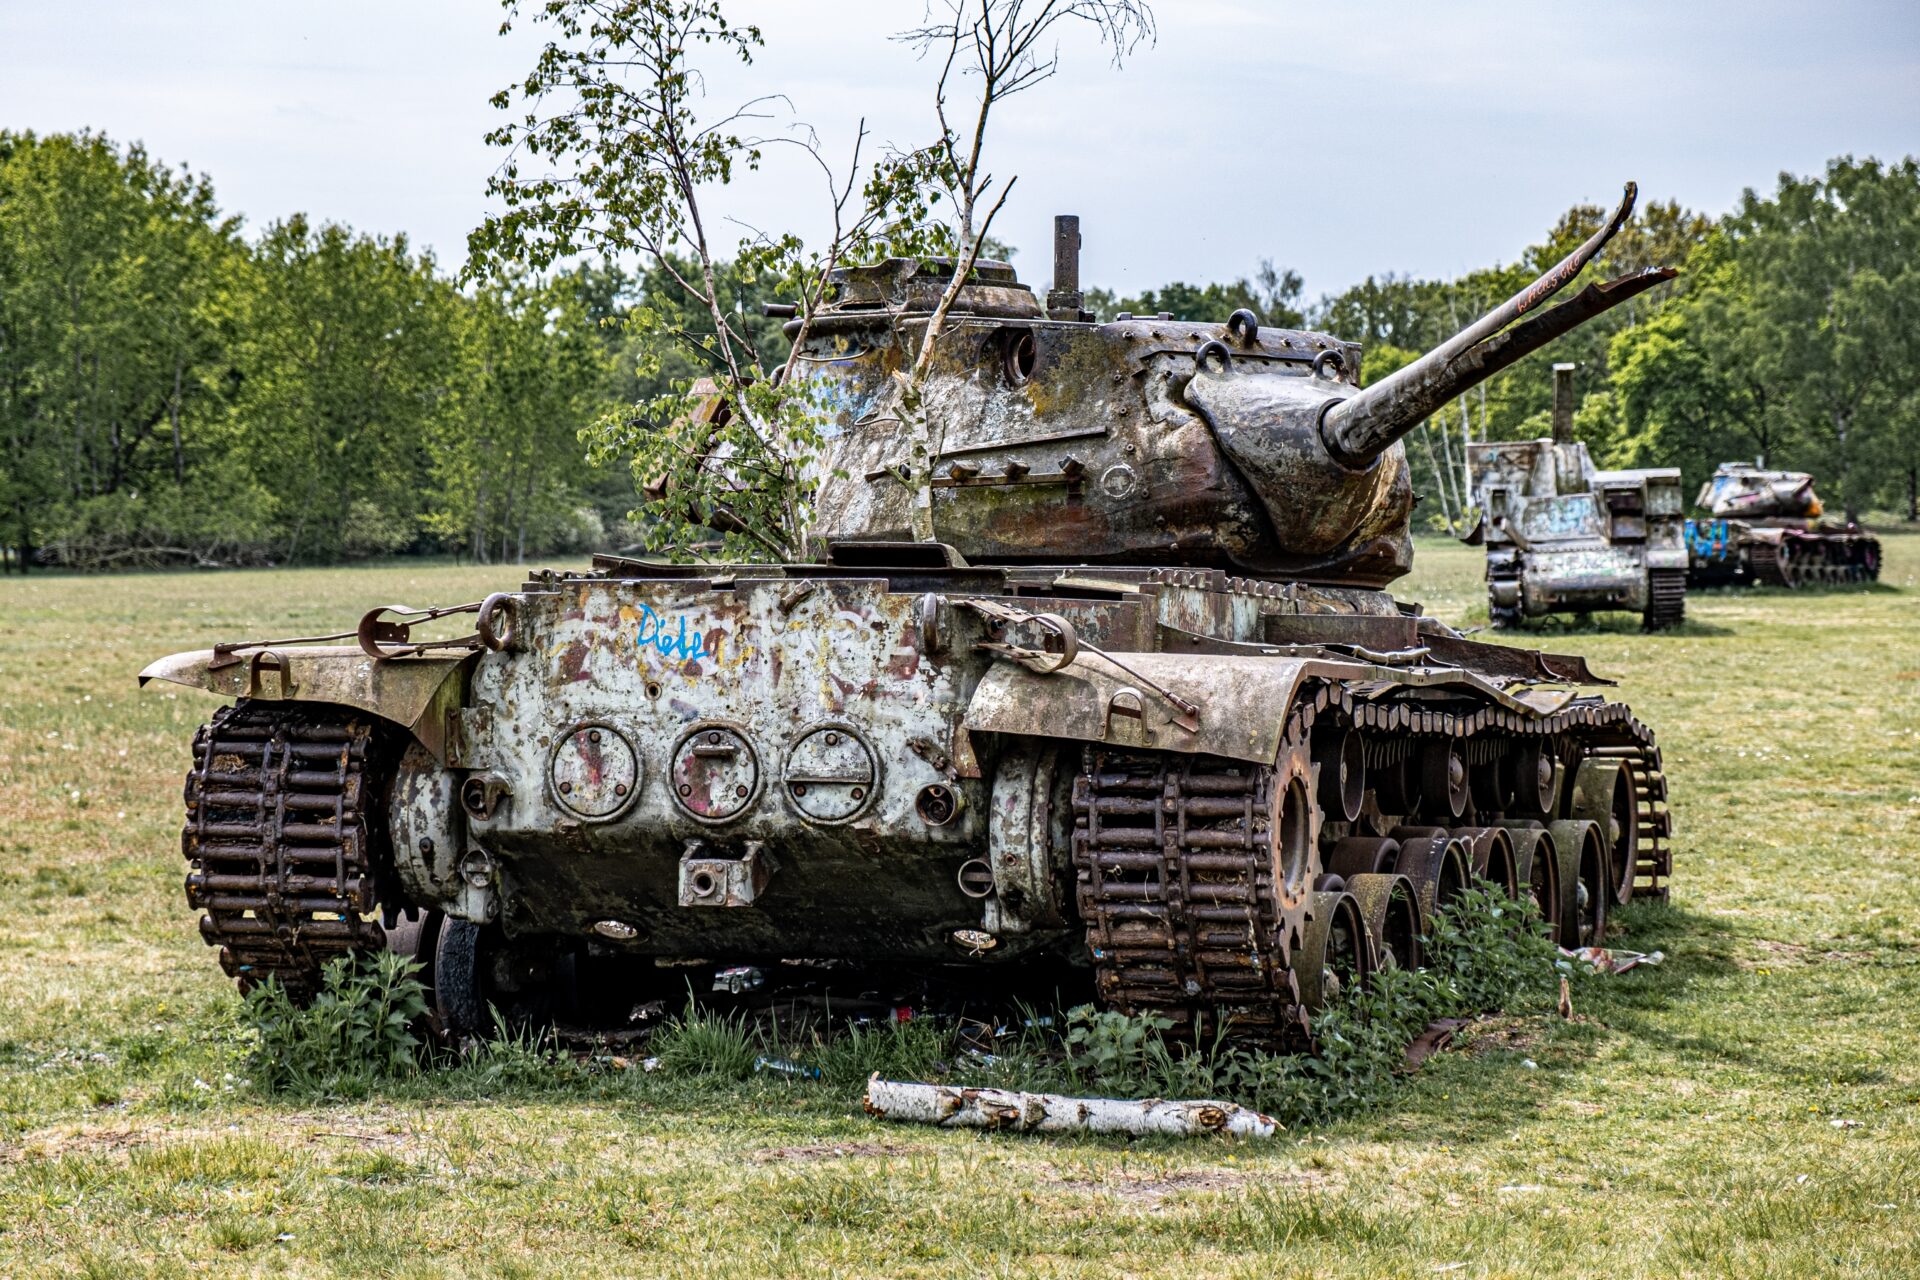 In Langenhagen, Germany, abandoned tanks sit in a clearing surrounded by trees (Joshua Kettle/Unsplash)